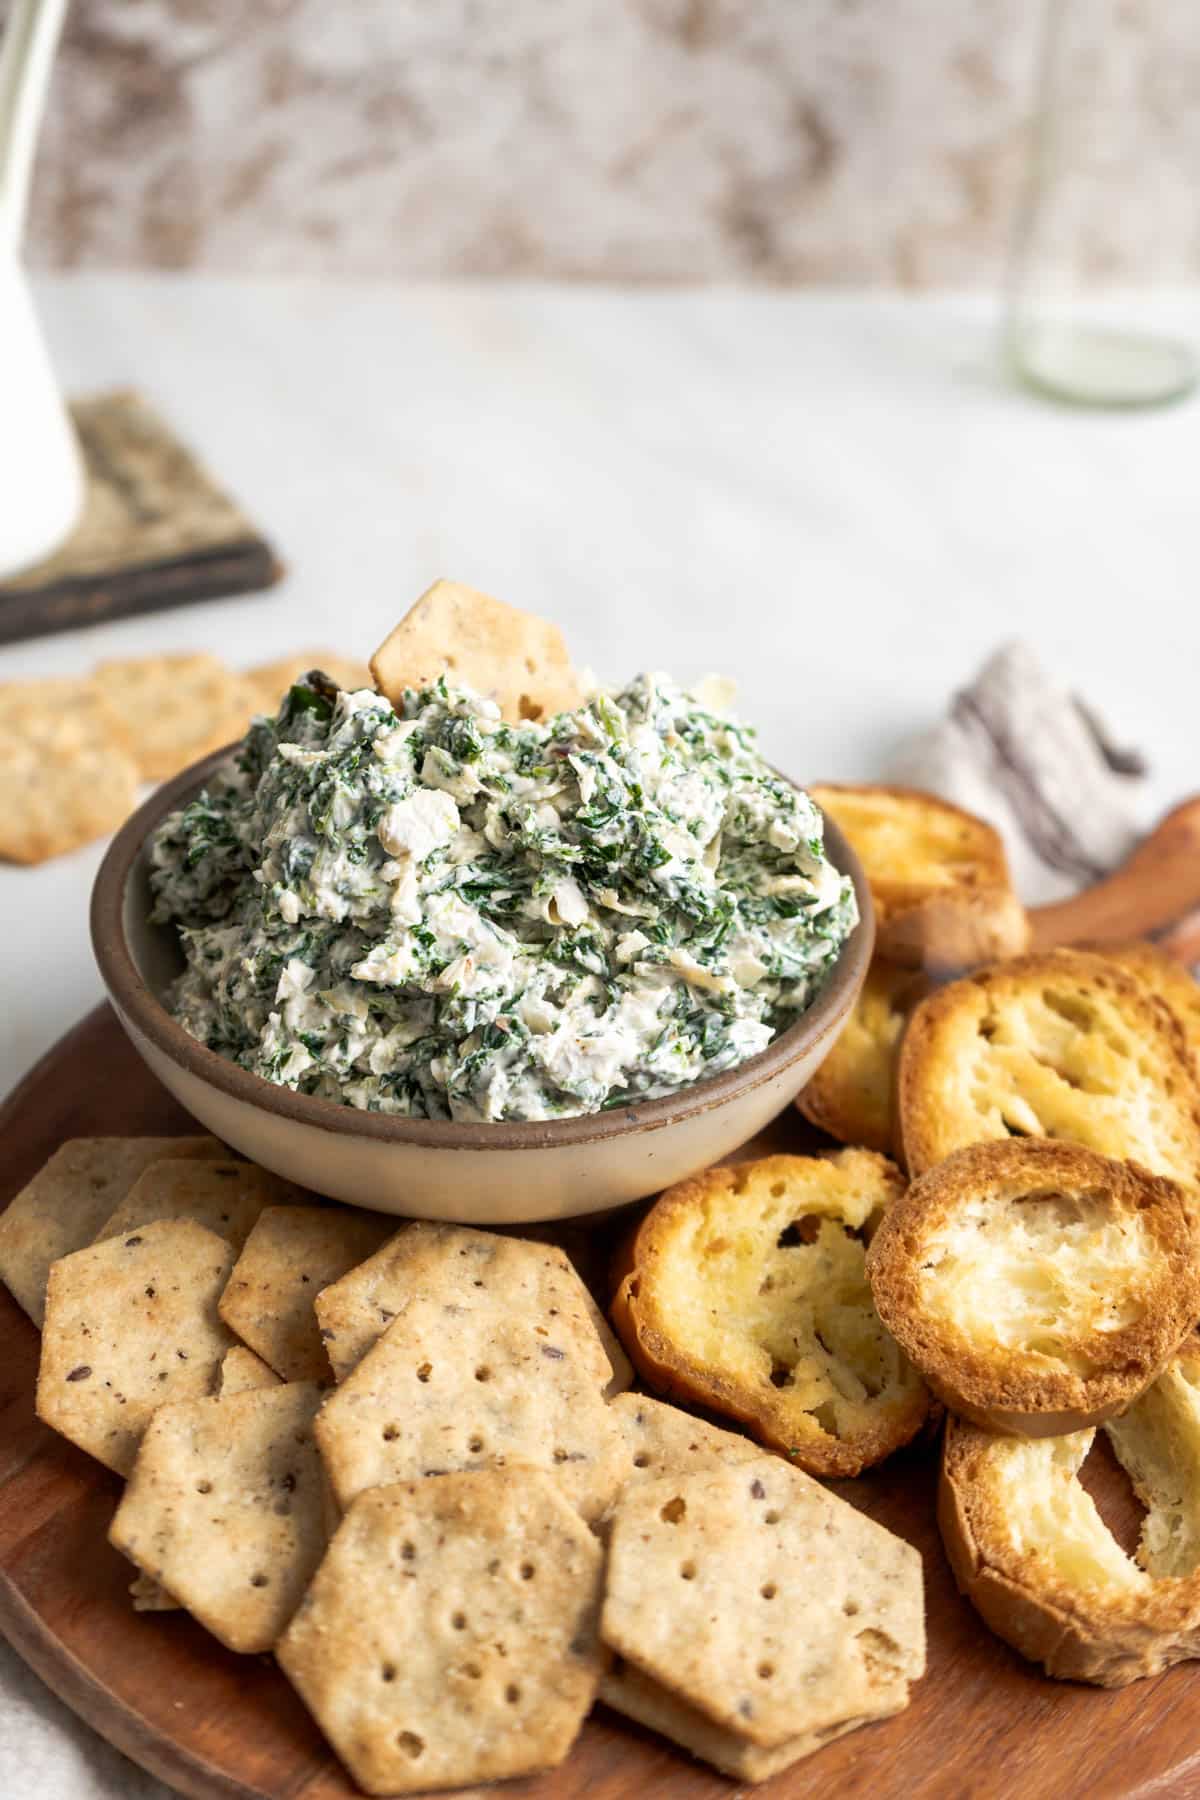 Spinach artichoke dip in a bowl with sides of bread and crackers.